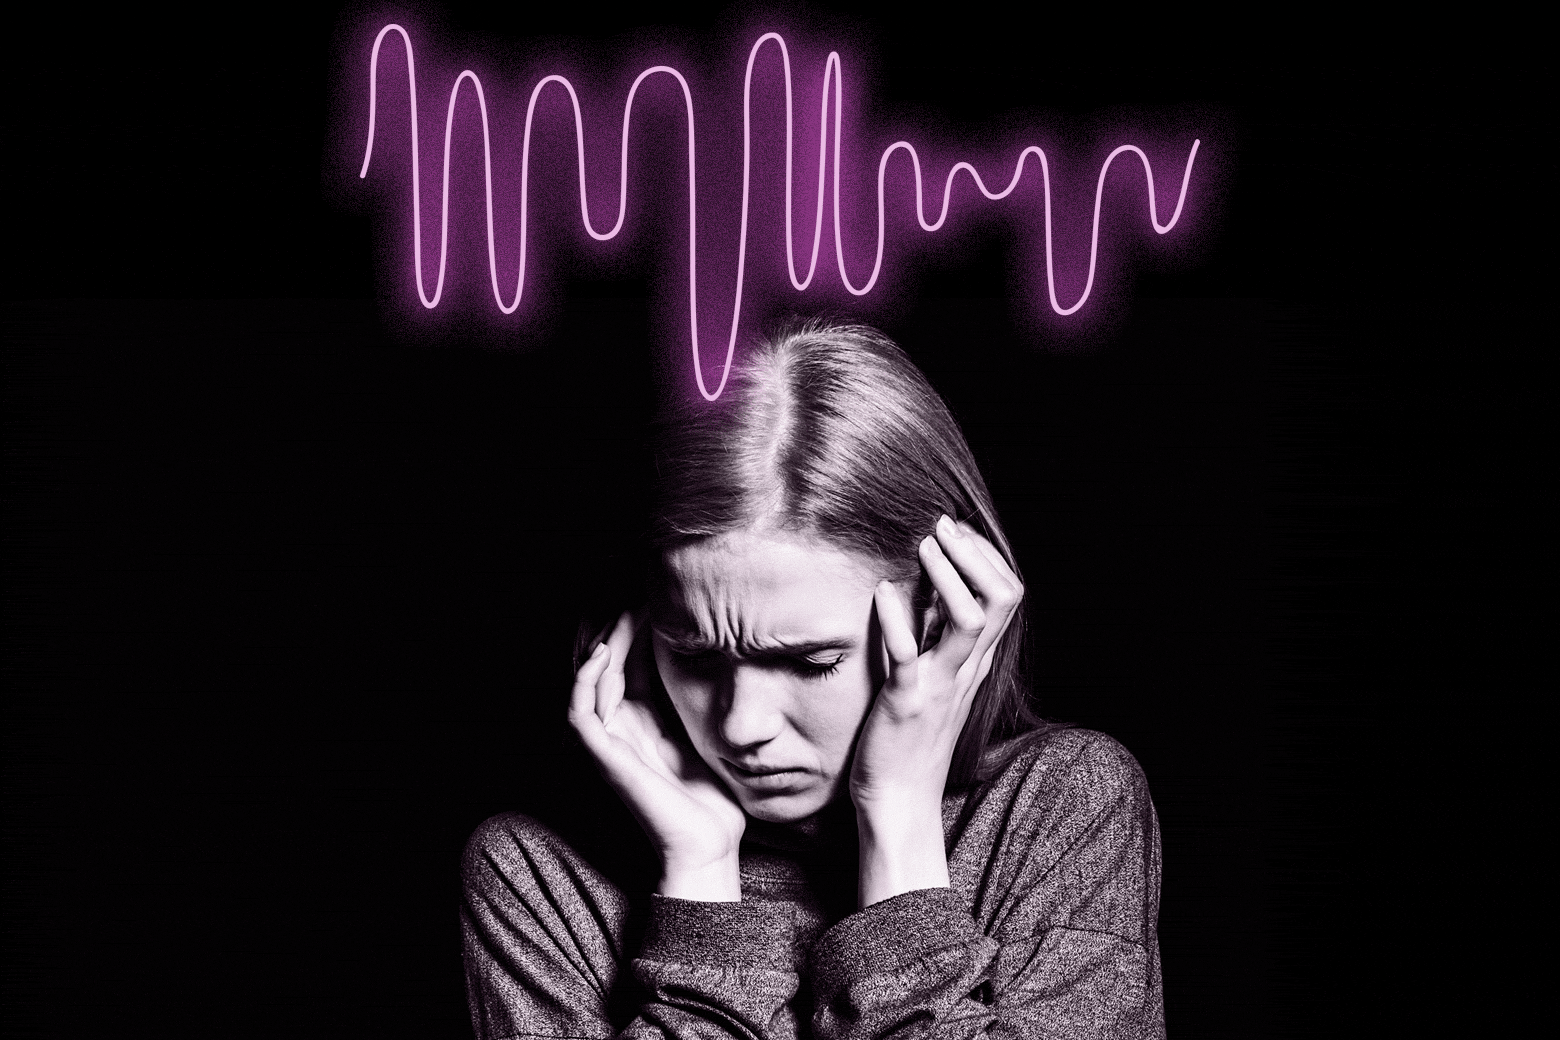 A woman covers her ears as neon squiggles indicating audio blink overhead.